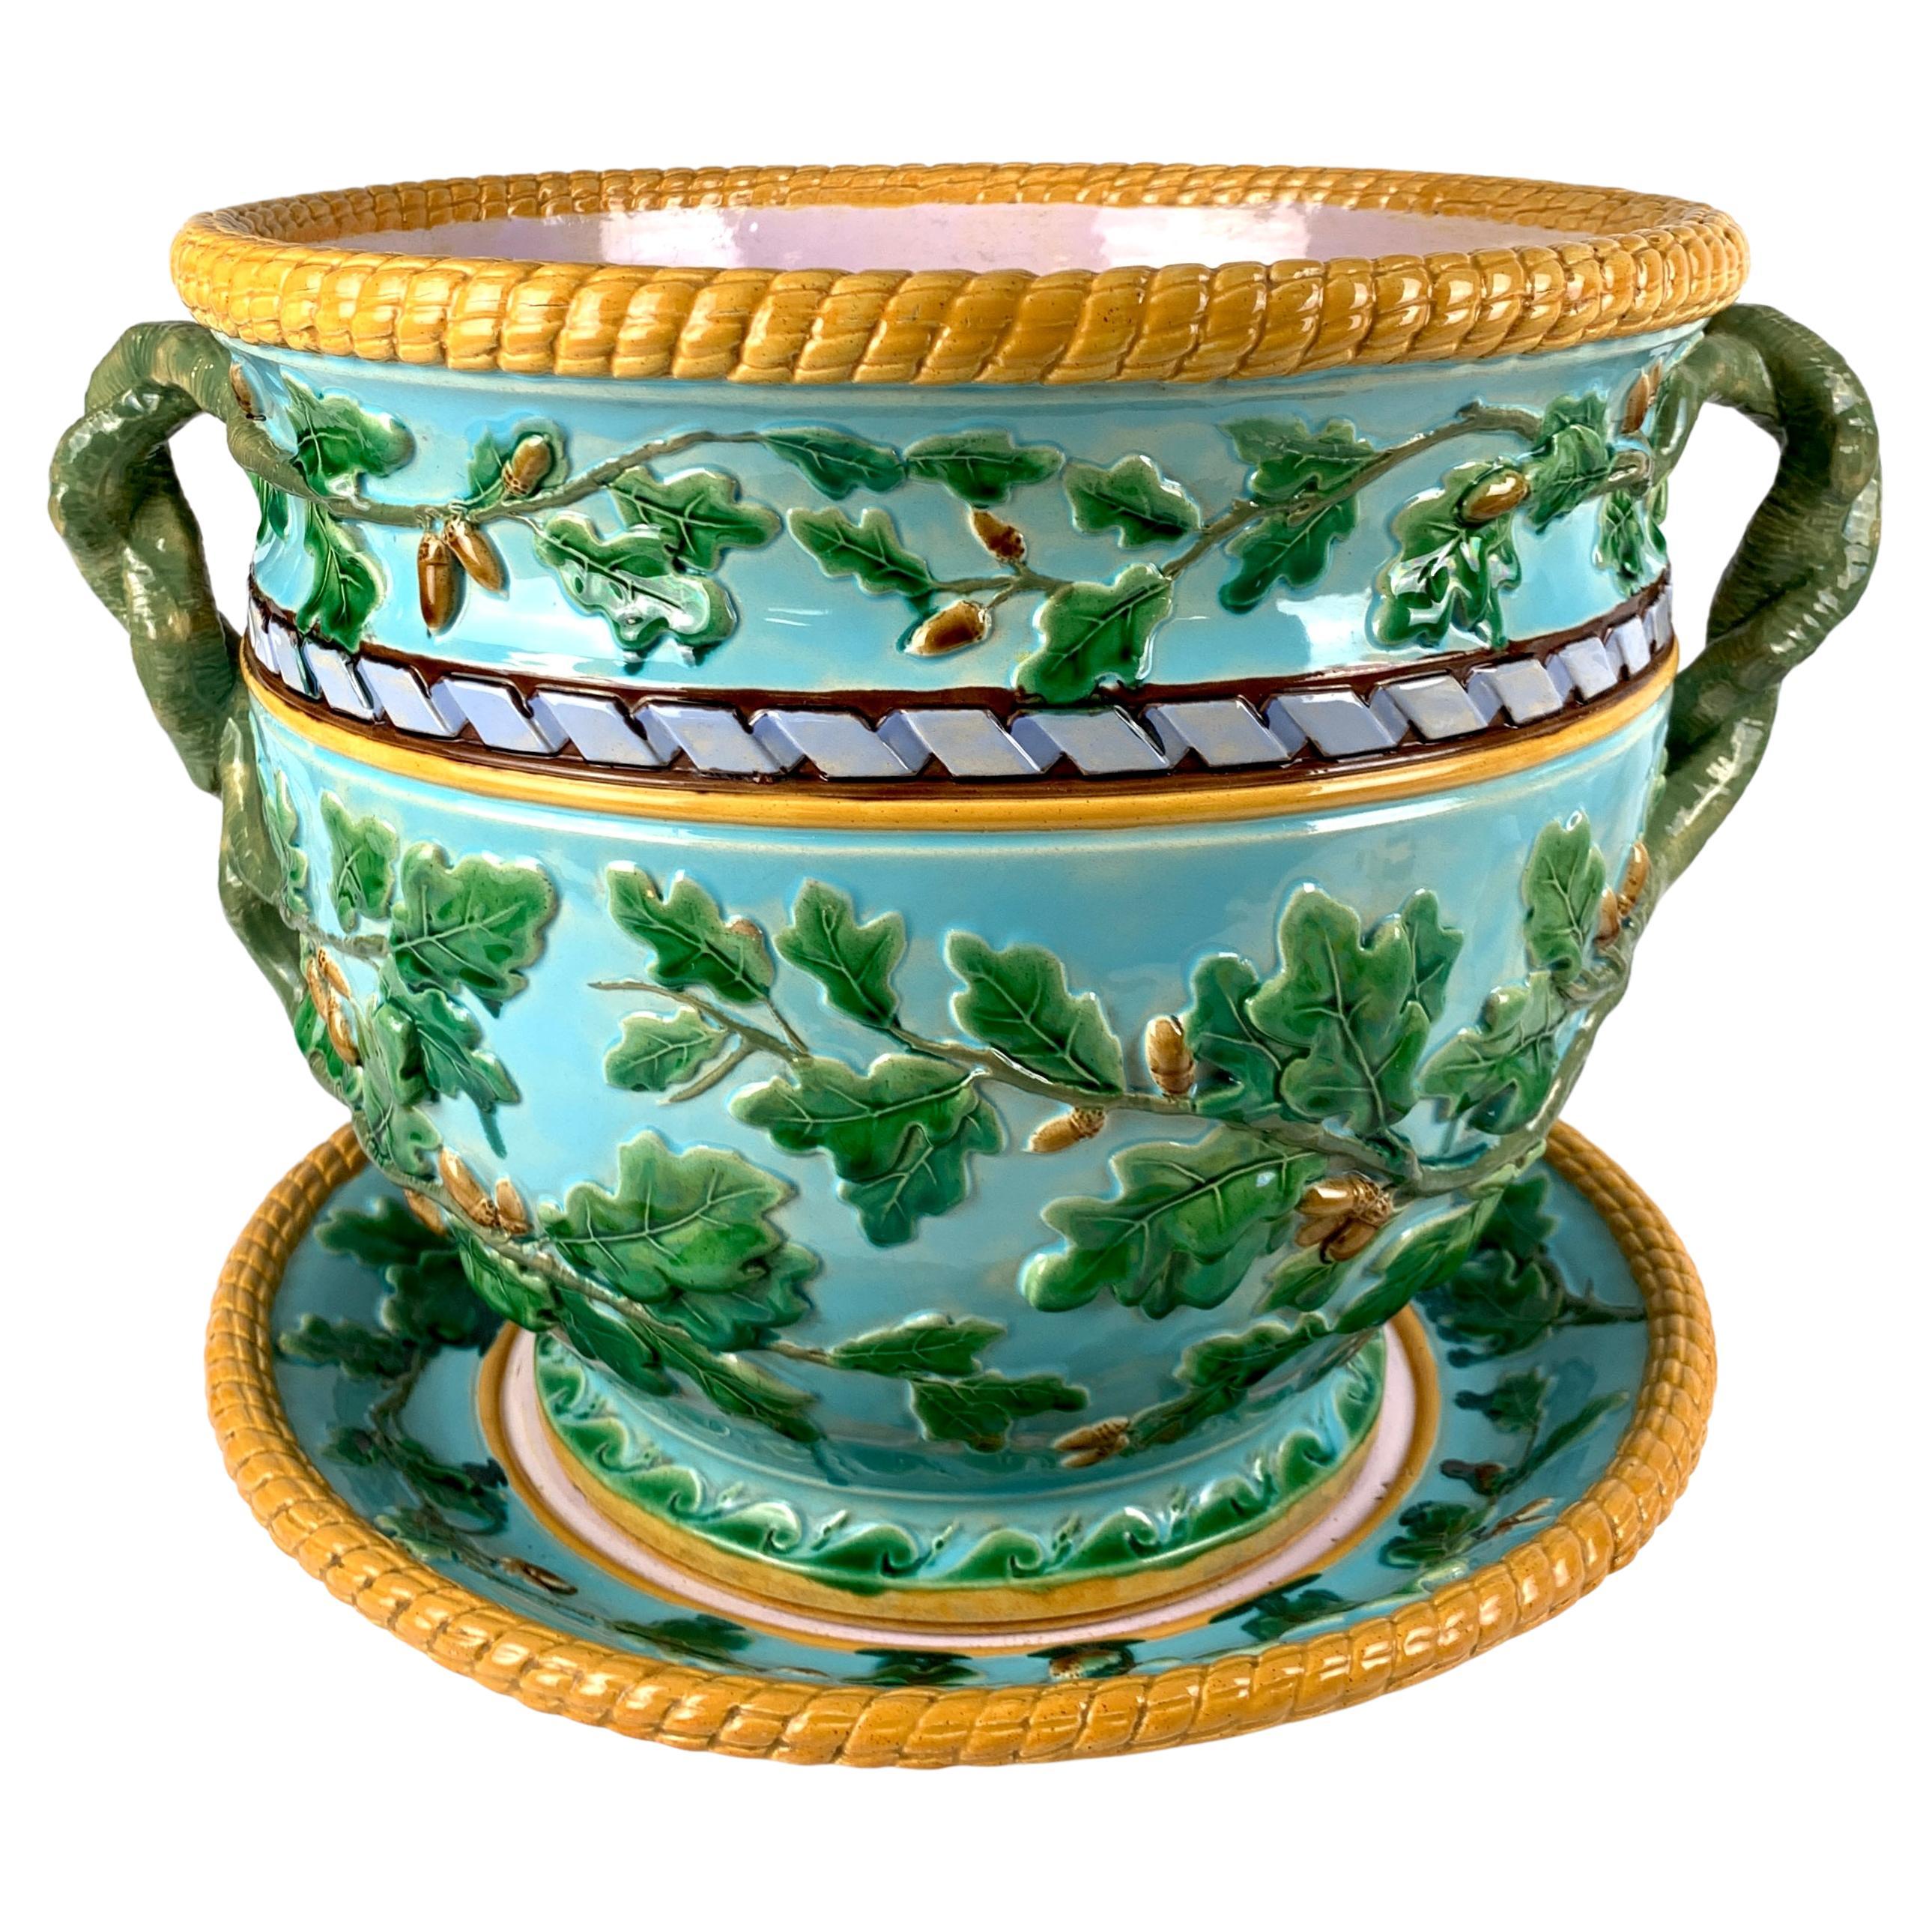 Large Antique Majolica Planter Made Circa 1880 Turquoise Ground & Green Leaves